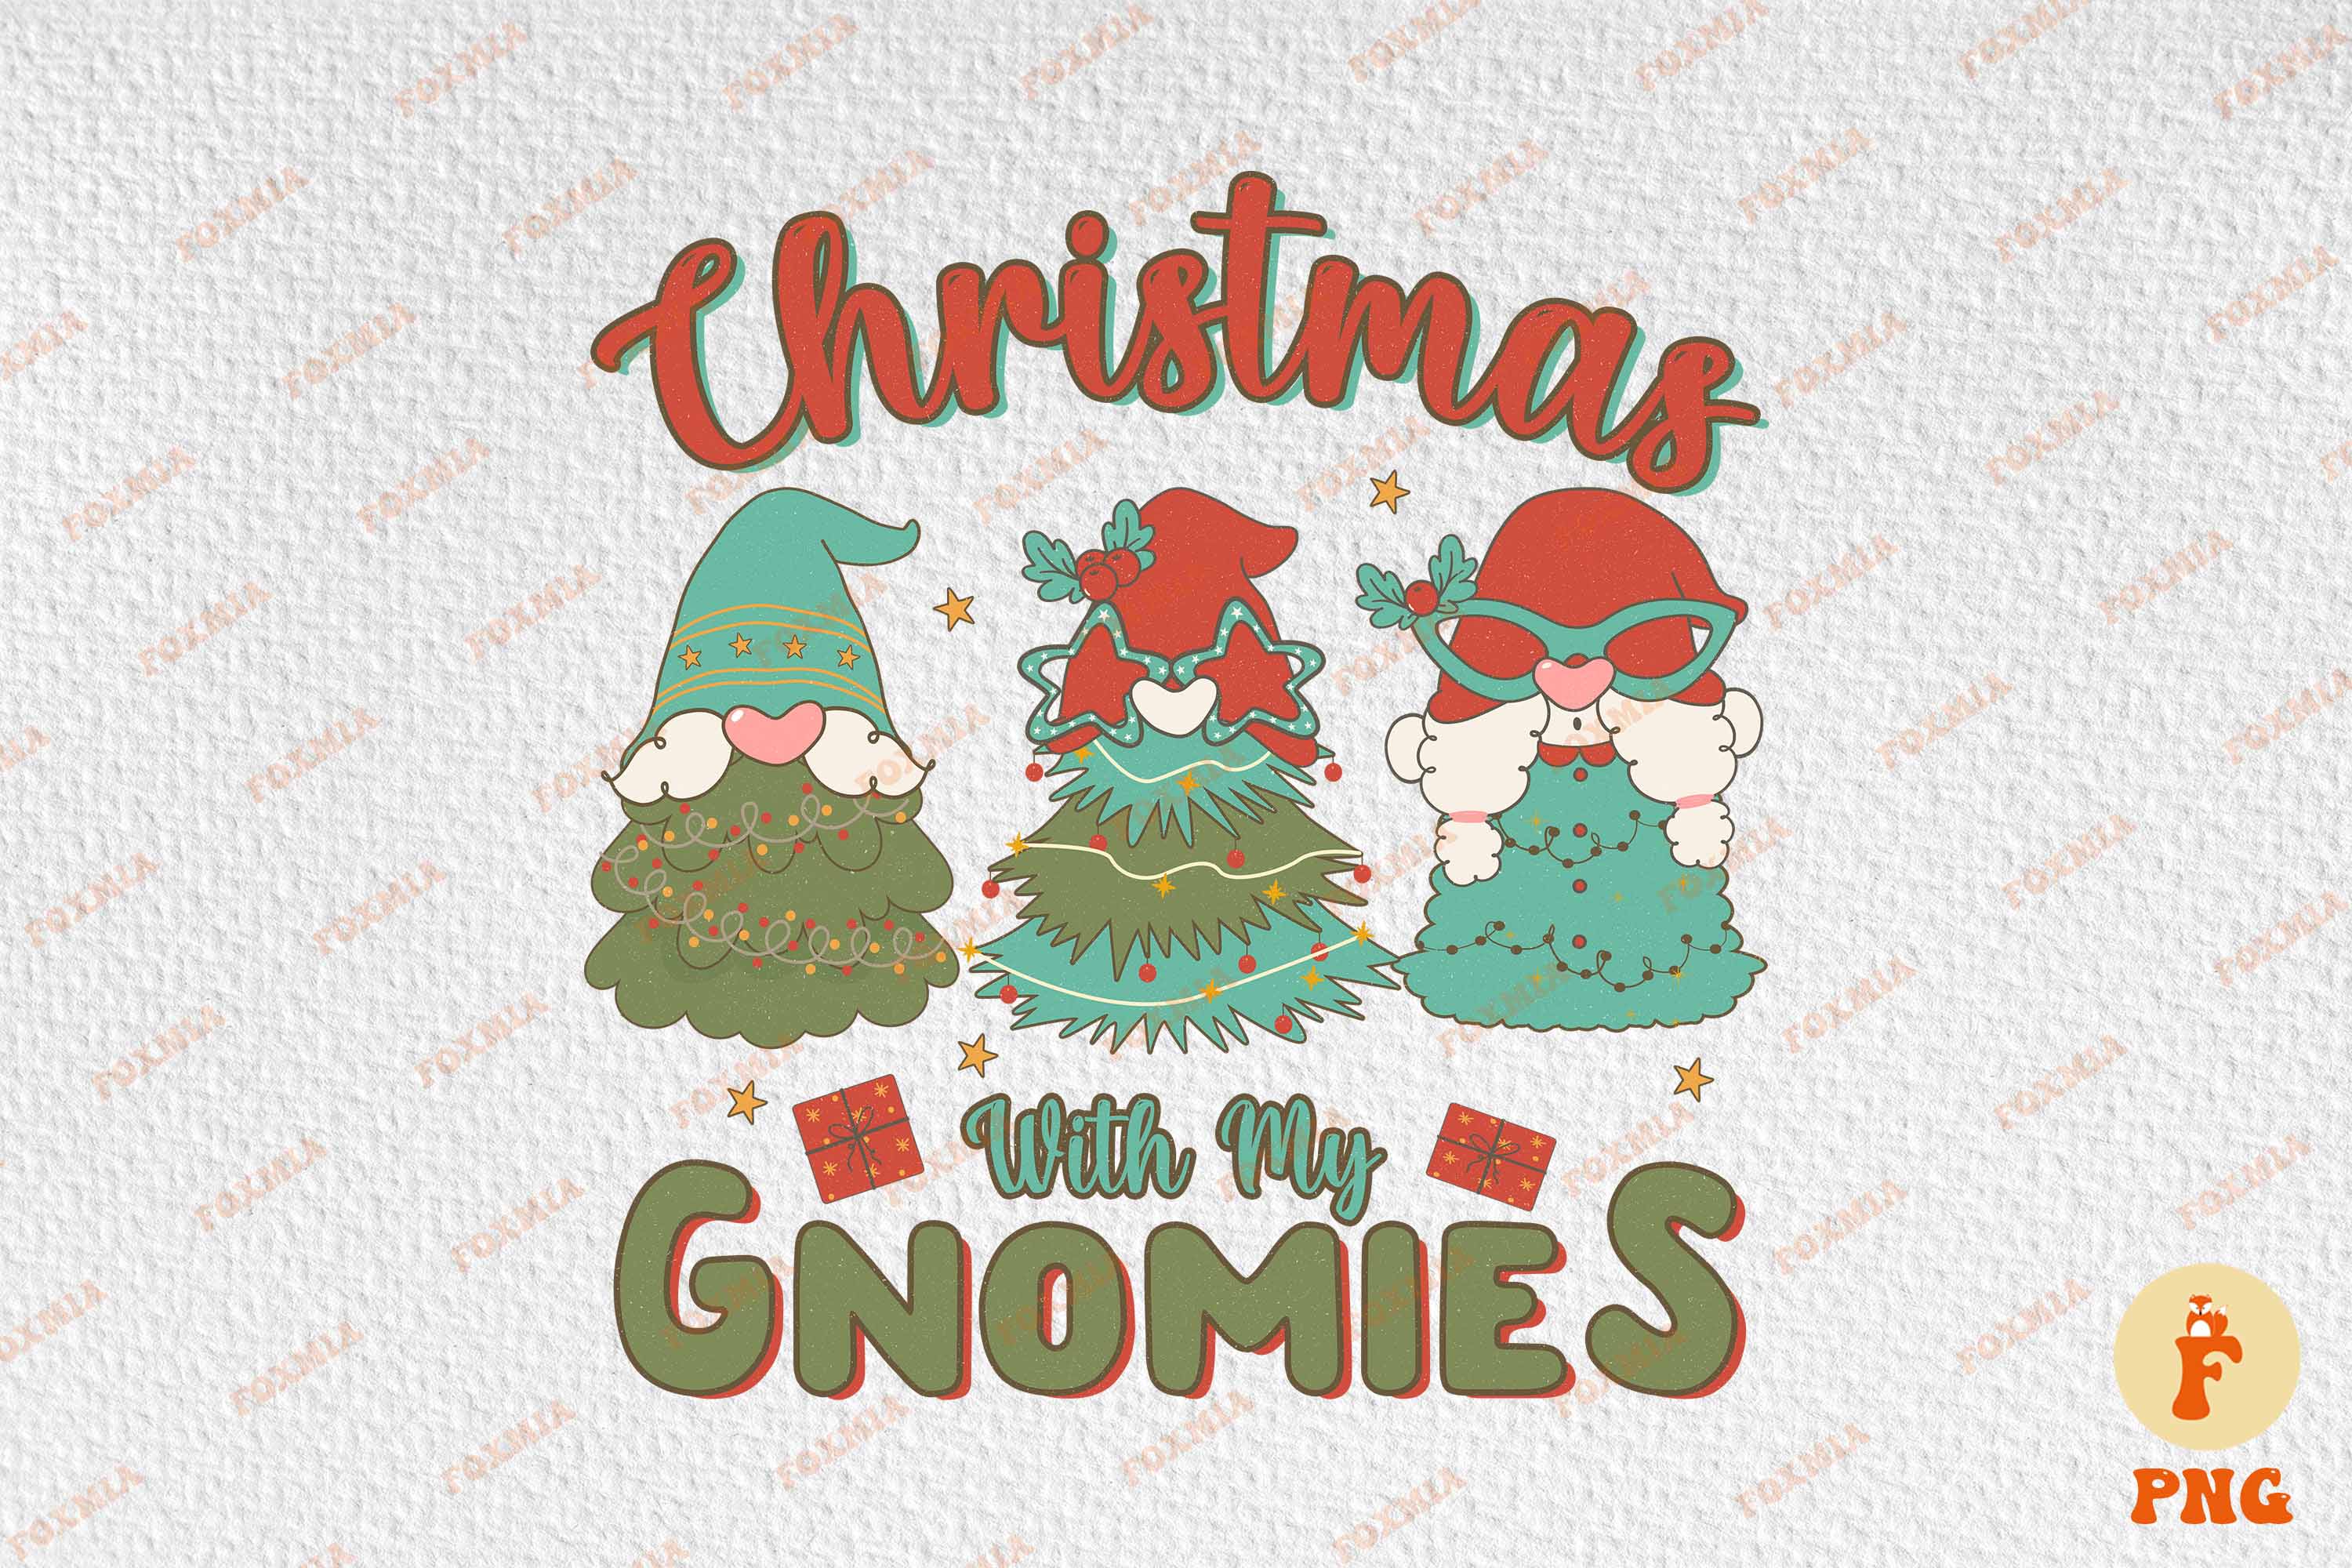 Christmas gnomes for your project design.